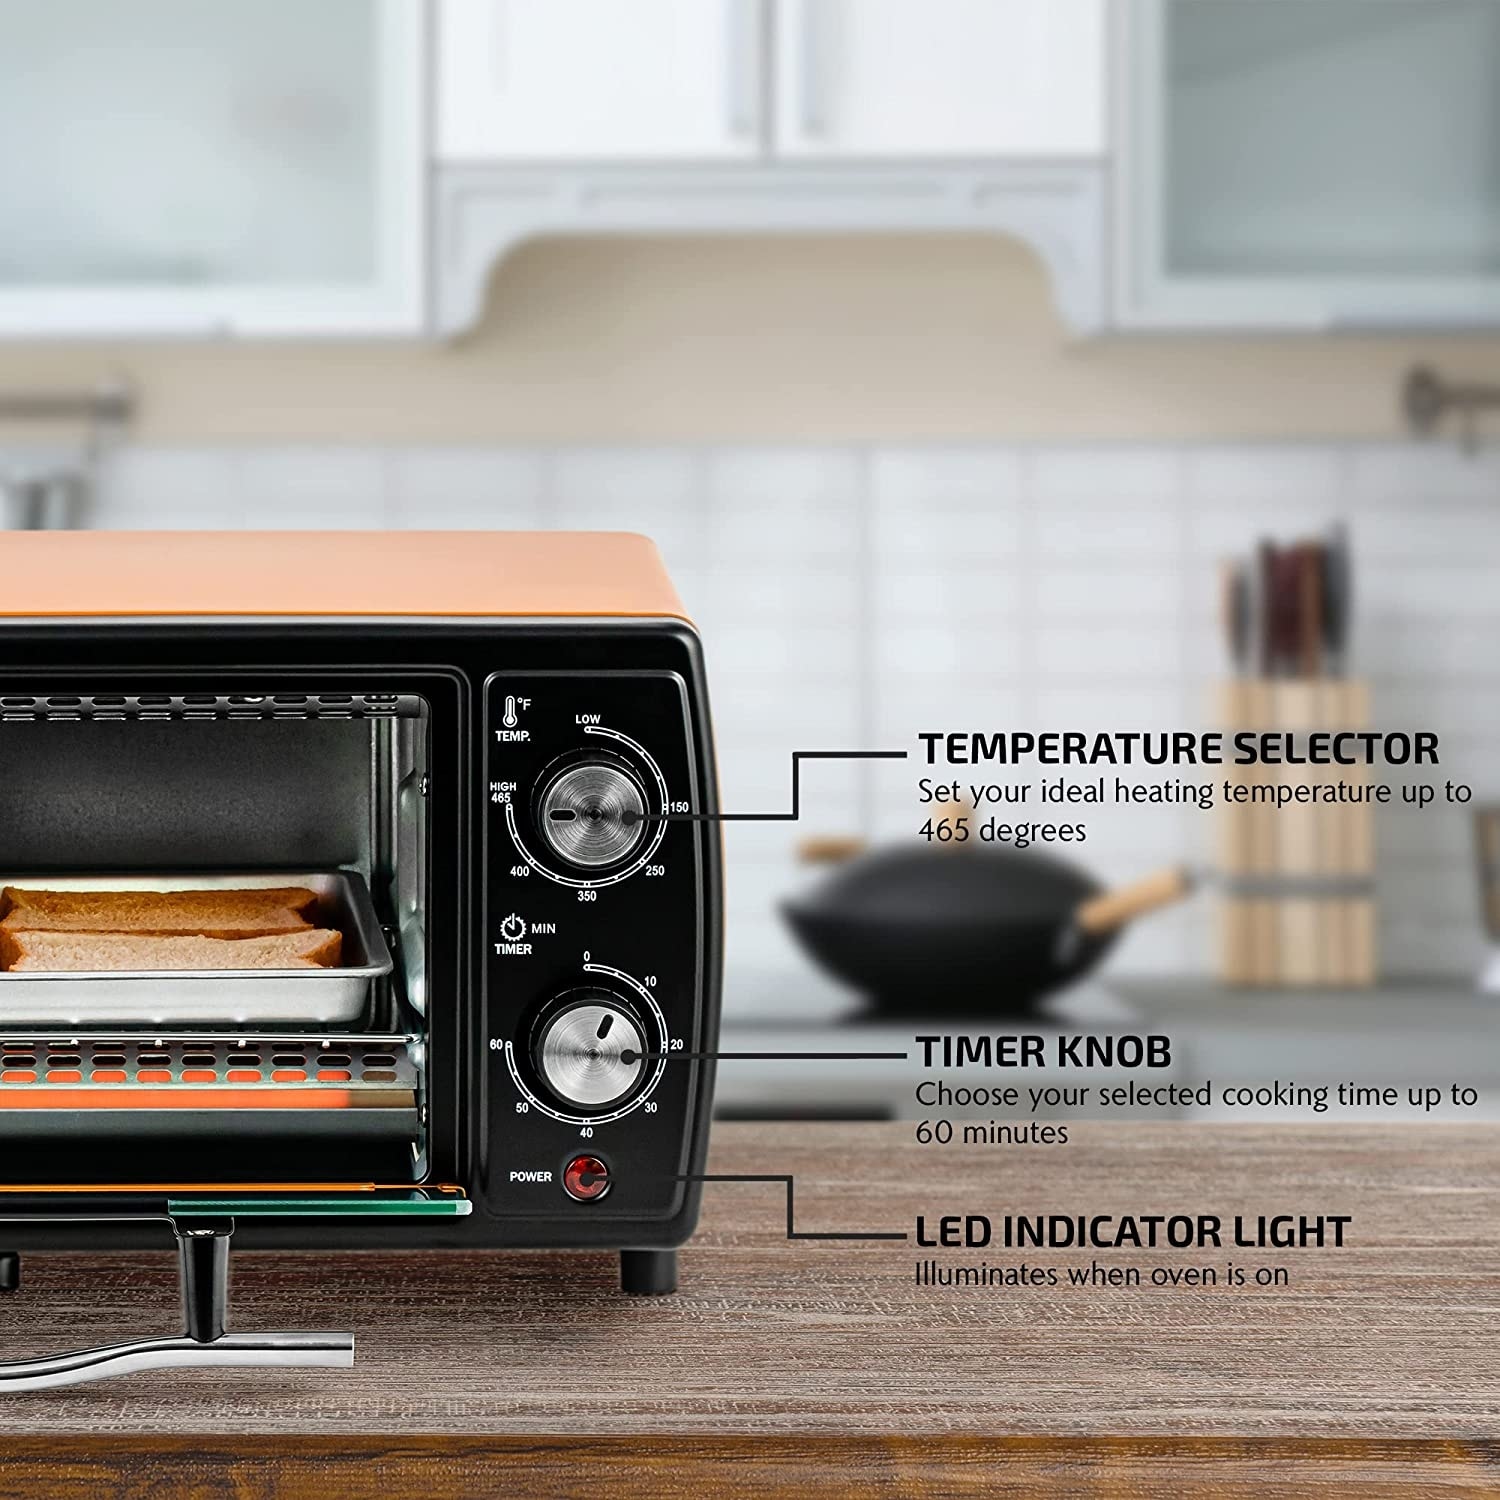 https://ak1.ostkcdn.com/images/products/is/images/direct/27a4f7f47646a8de6024f3a319c2847624adc9fb/Ovente-Countertop-4-Slice-Capacity-Convection-Toaster-Oven-w--Baking-Pan-Crumb-Tray-%26-Grill-Rack%2C-Copper-TO6895CO.jpg